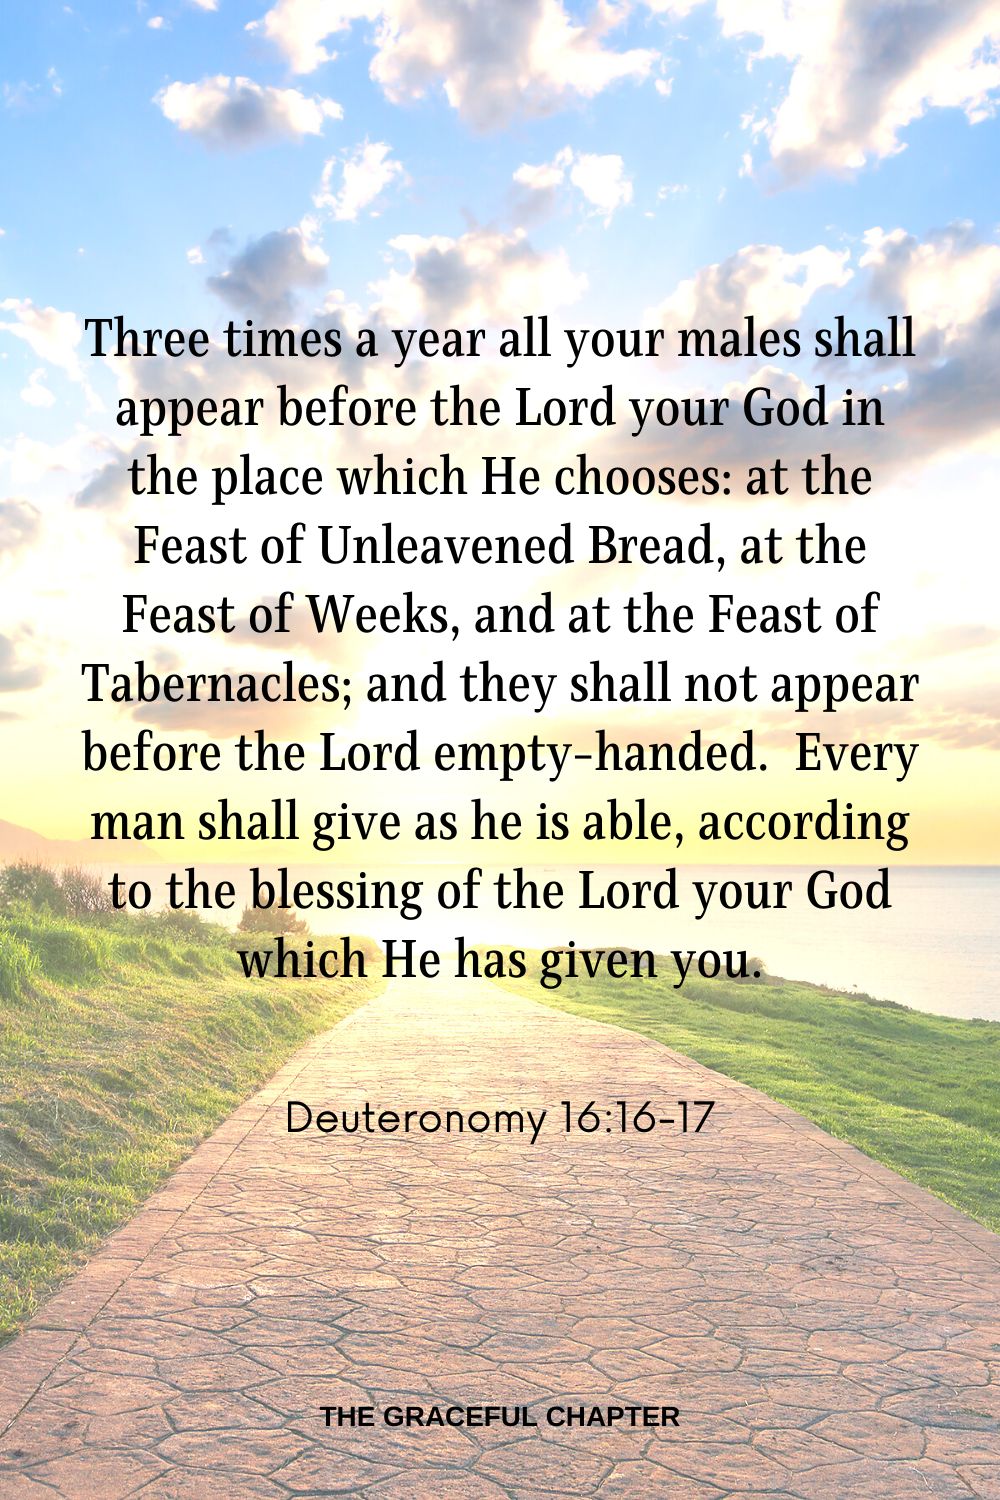 “Three times a year all your males shall appear before the Lord your God in the place which He chooses: at the Feast of Unleavened Bread, at the Feast of Weeks, and at the Feast of Tabernacles; and they shall not appear before the Lord empty-handed.  Every man shall give as he is able, according to the blessing of the Lord your God which He has given you. Deuteronomy 16:16-17